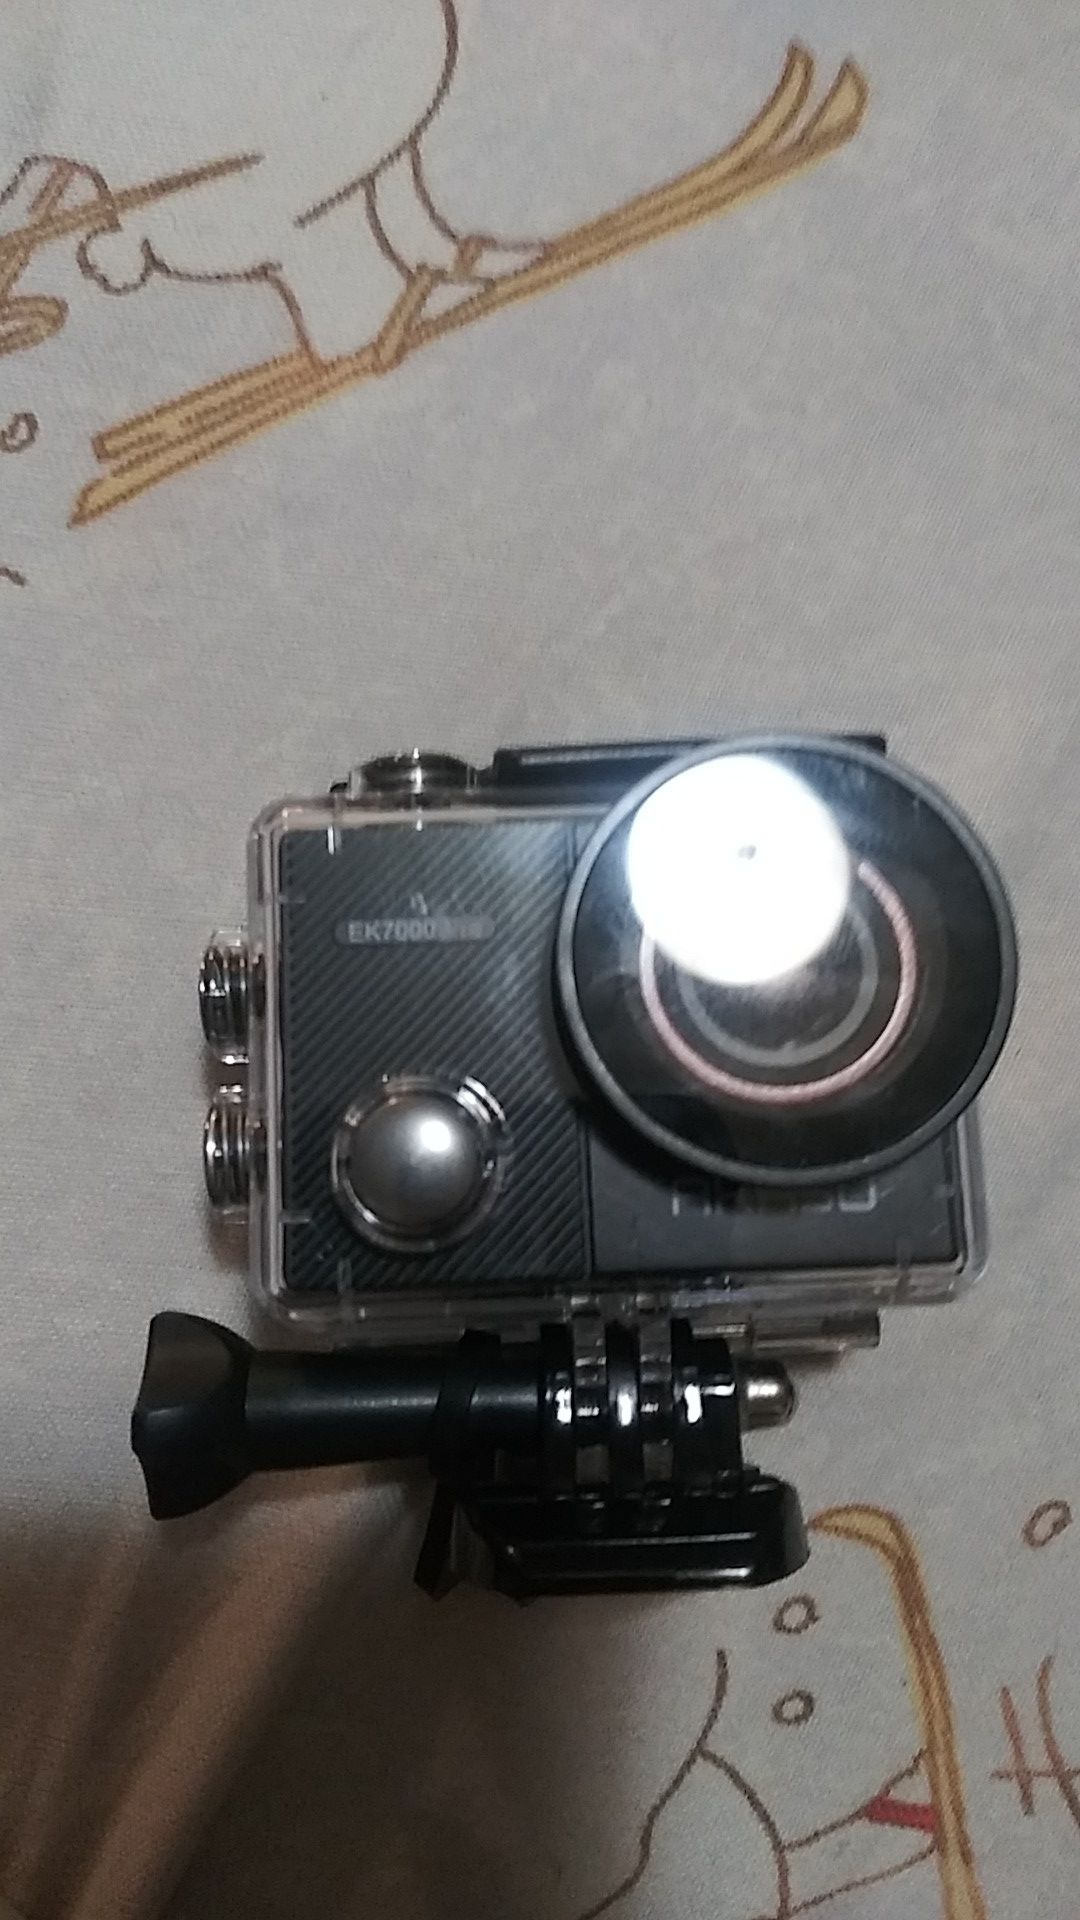 Brand new go pro an 7000. Video camers